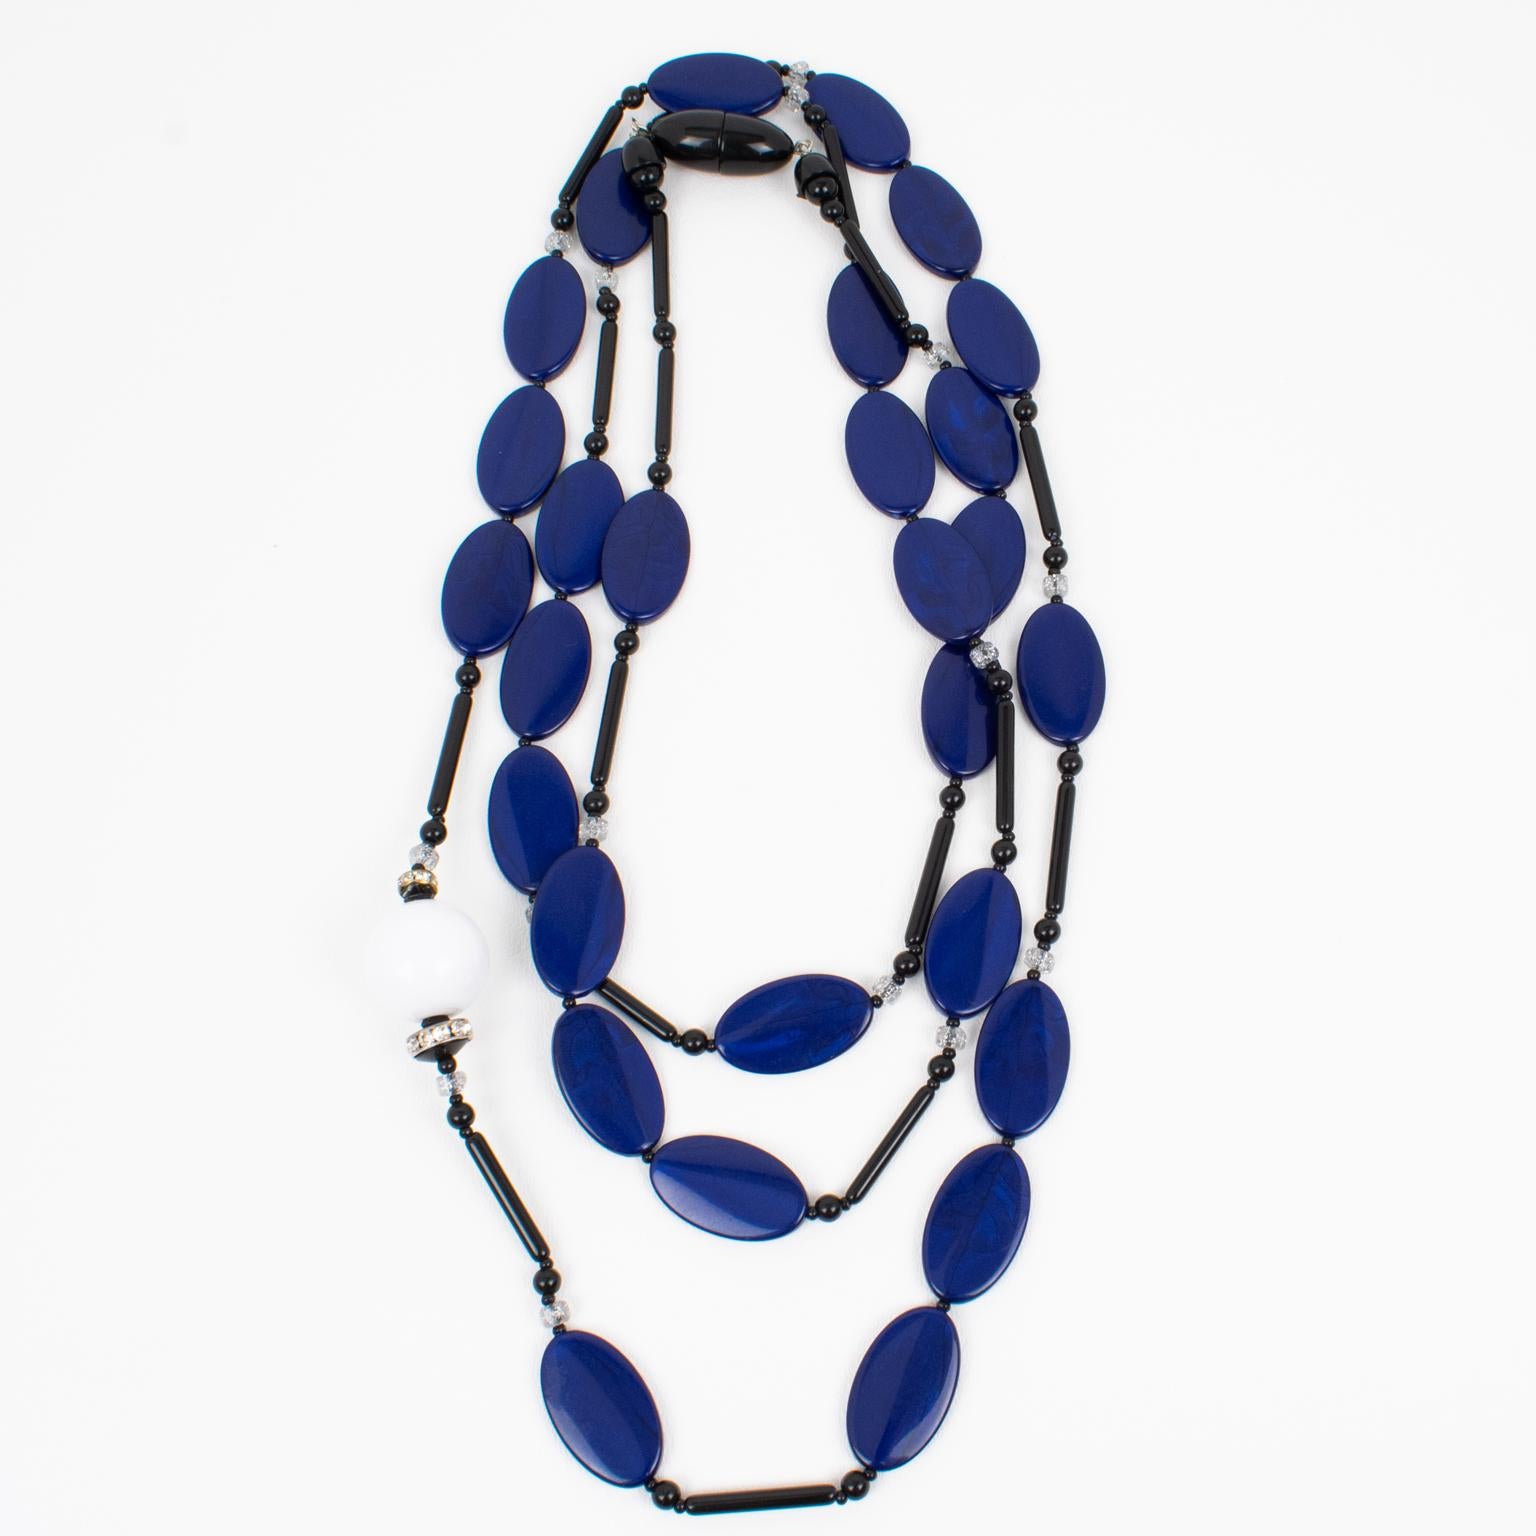 Angela Caputi Extra-Long Necklace Faux-Lapis Blue and White Resin Beads In Excellent Condition For Sale In Atlanta, GA